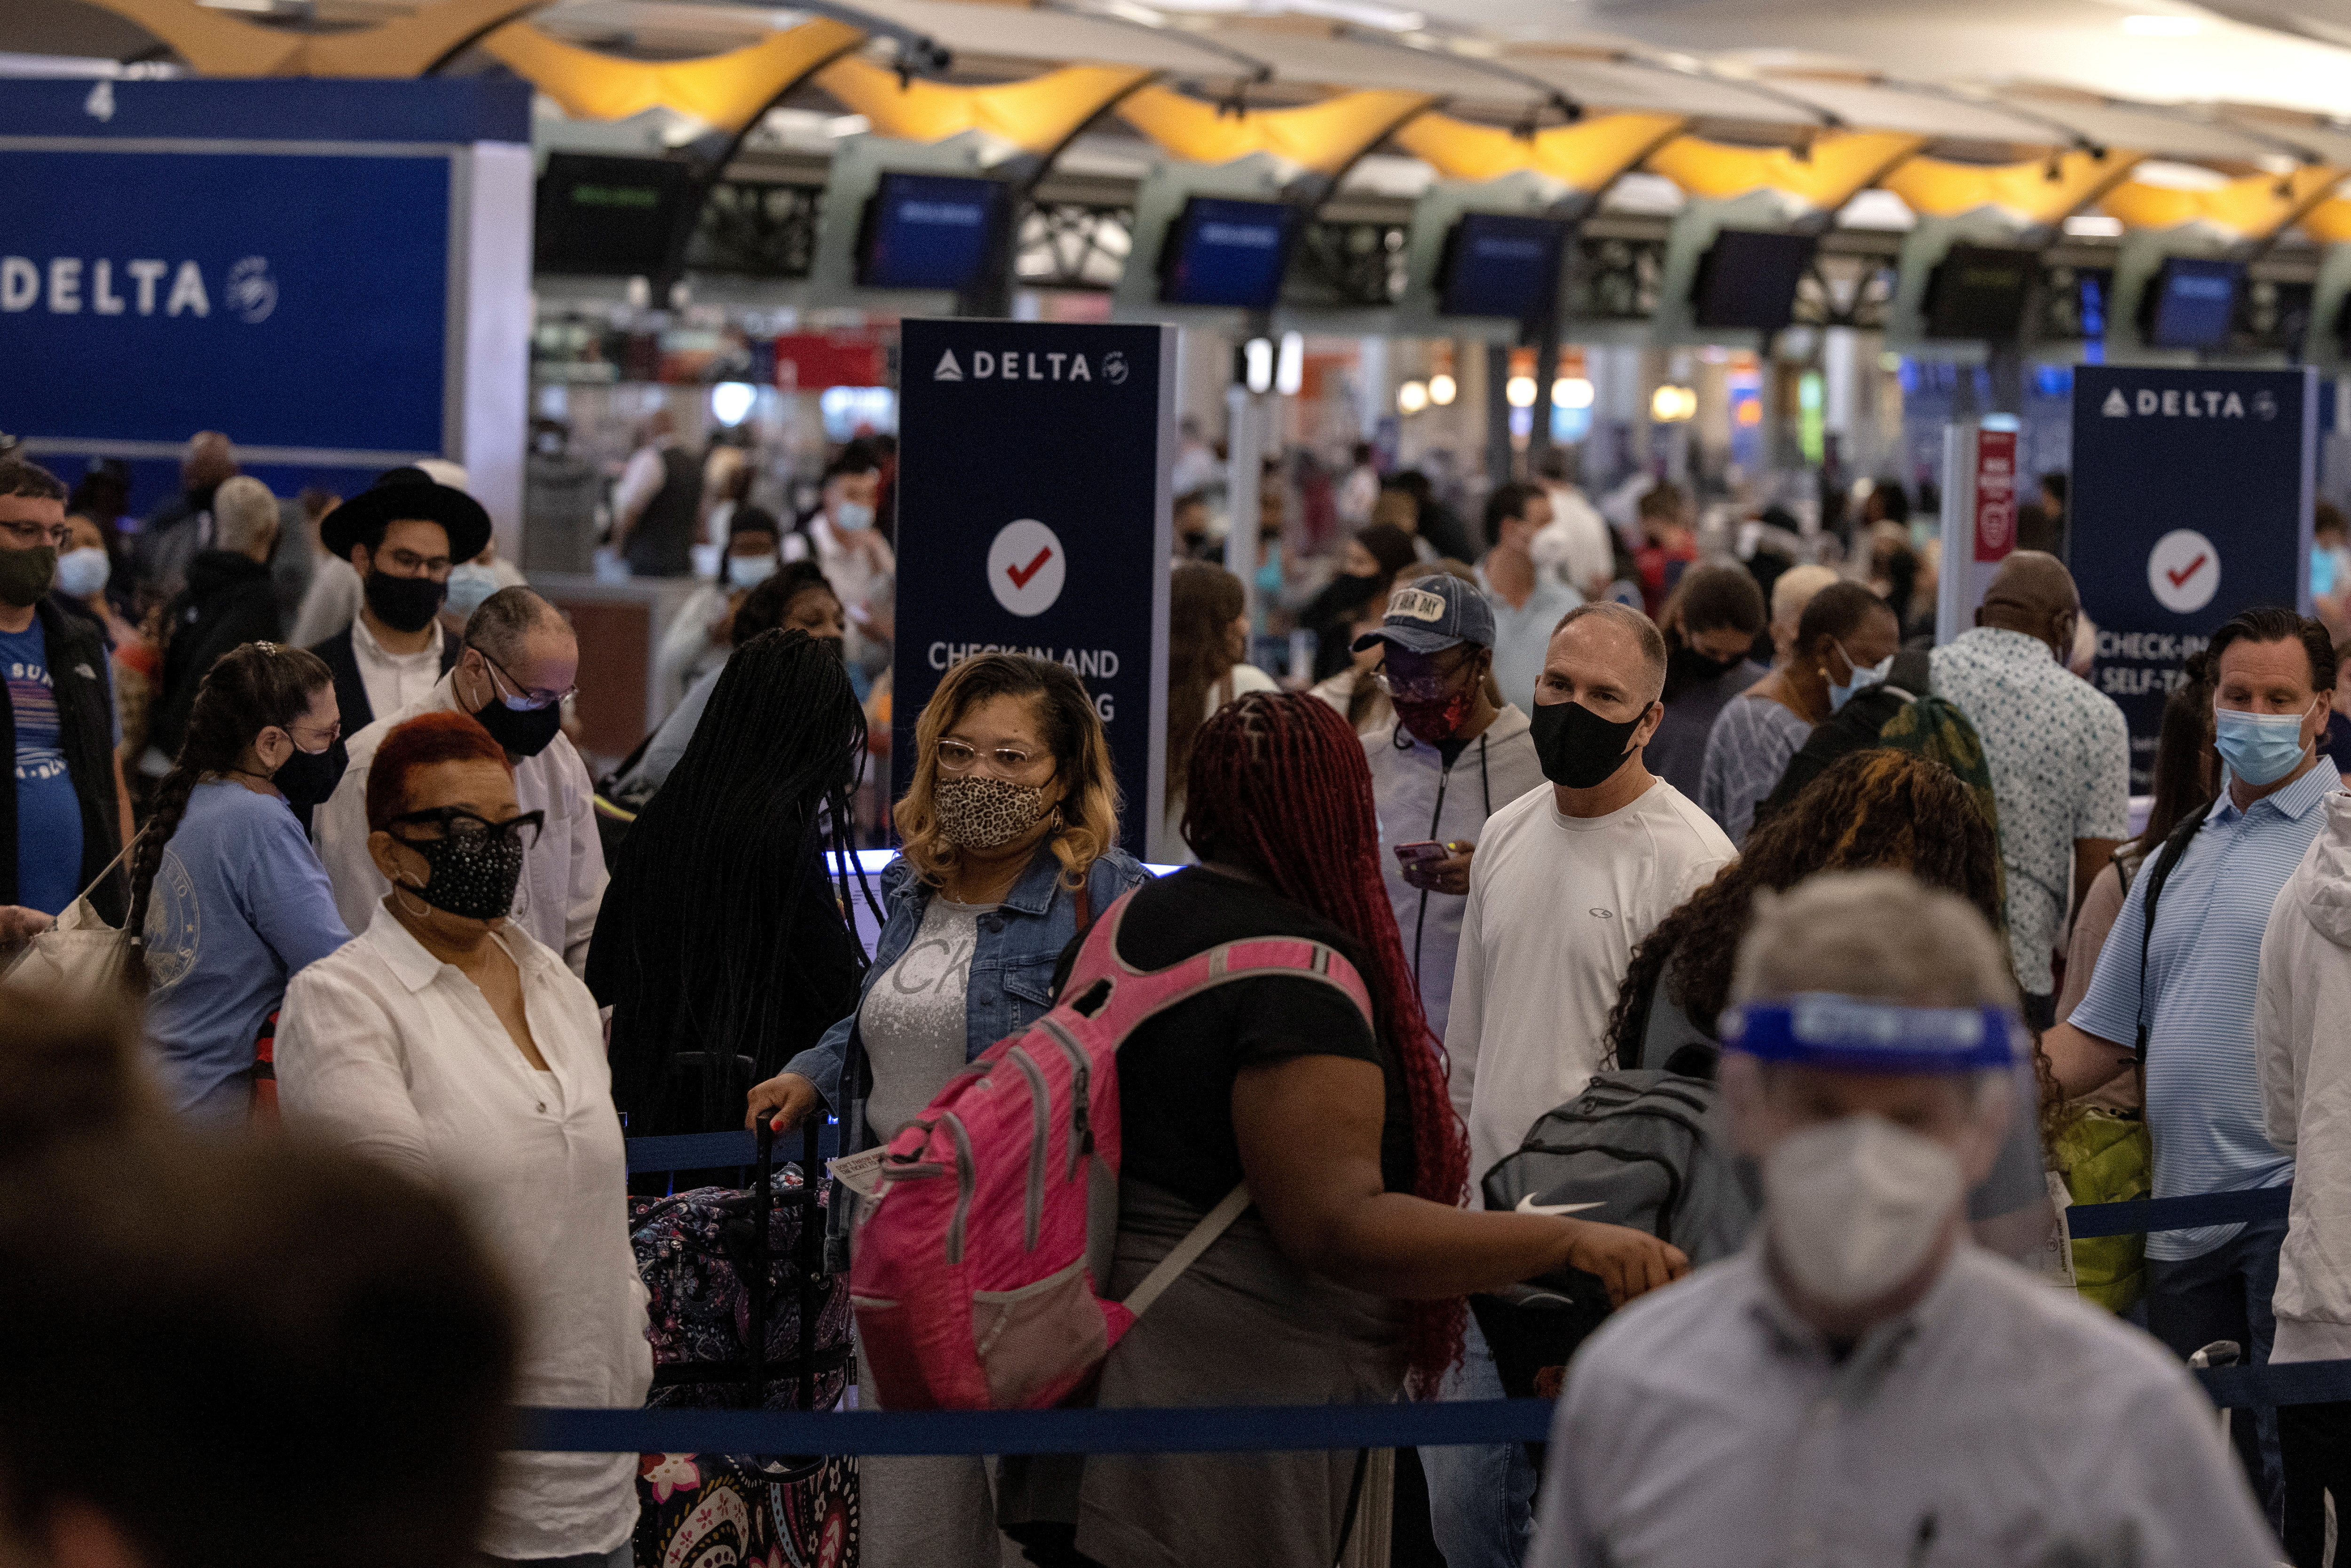 Passengers gather near Delta airline's counter as they check-in their luggage at Hartsfield-Jackson Atlanta International Airport, in Atlanta, Georgia, U.S., May 23, 2021.  REUTERS/Carlos Barria/File Photo